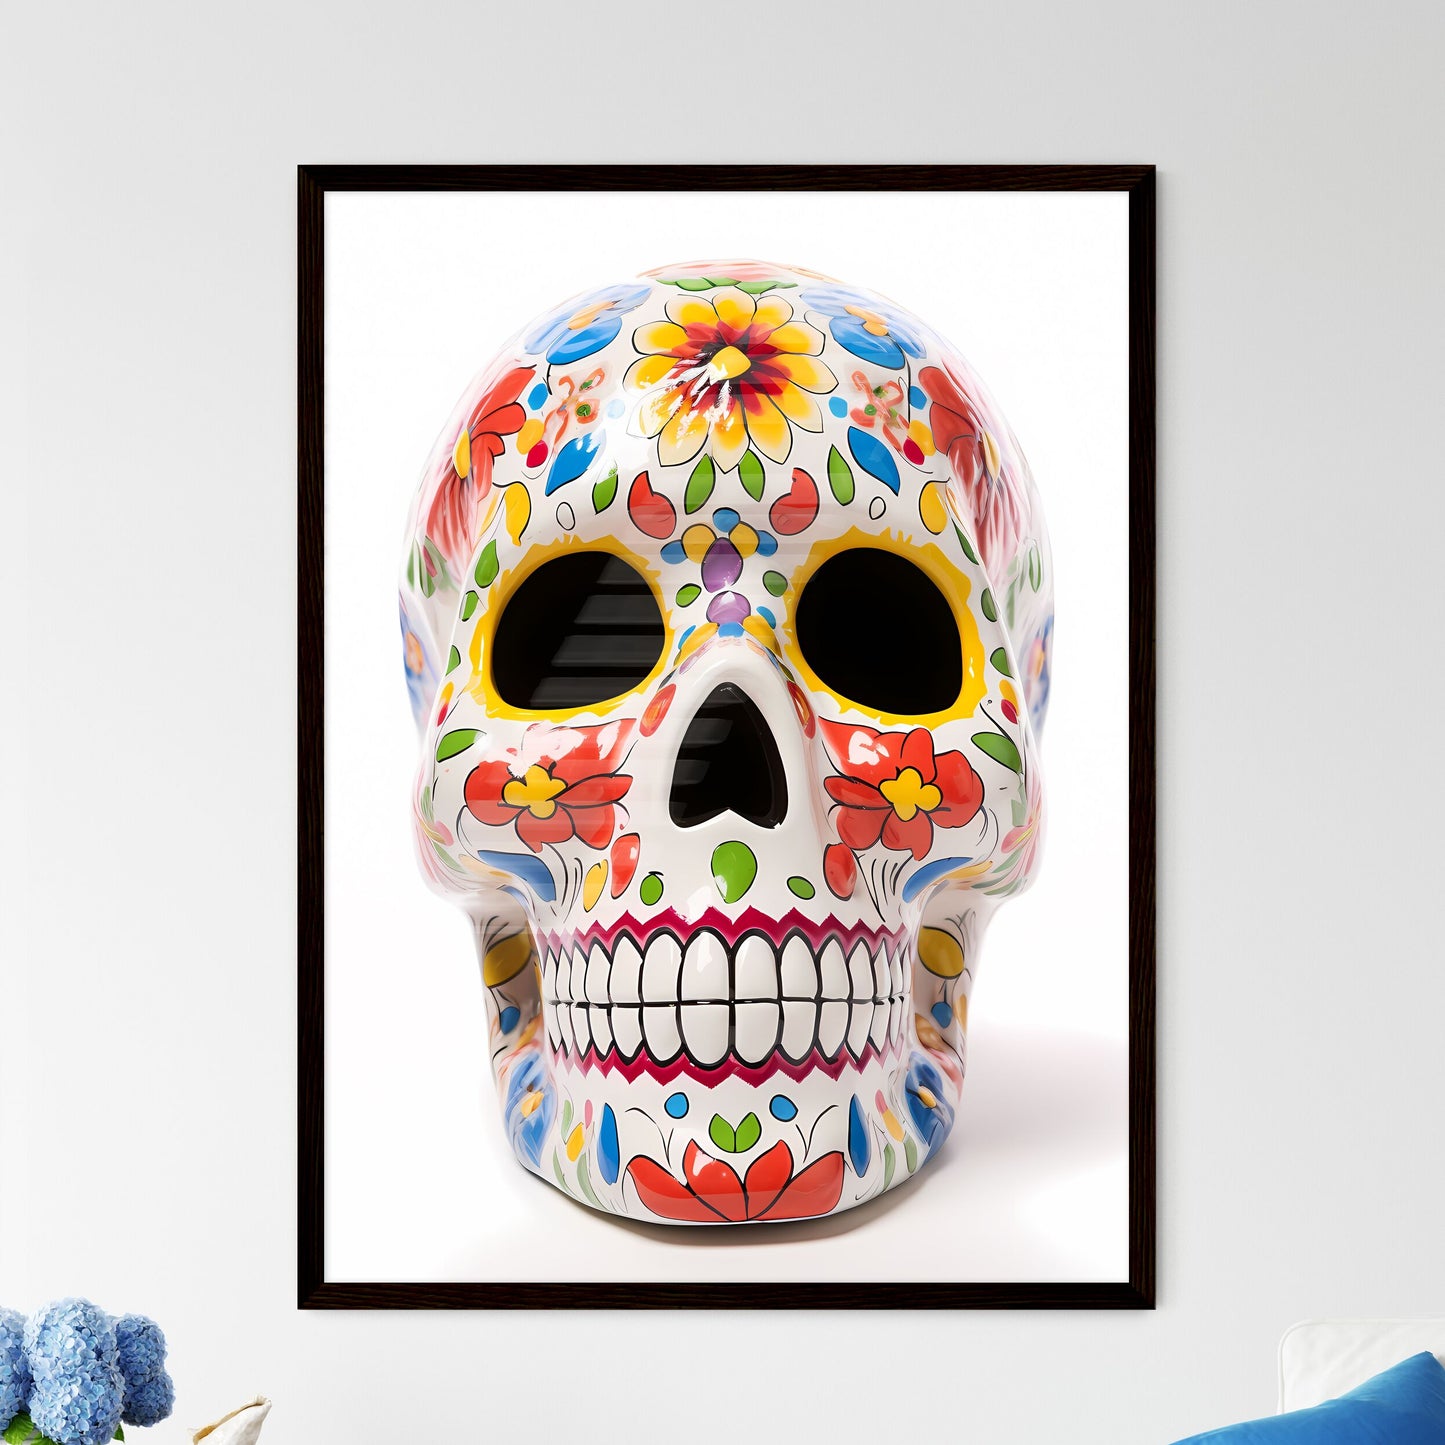 Watercolor Sugar Skull Painting: Intricate Floral Design on Colorful Skull Default Title